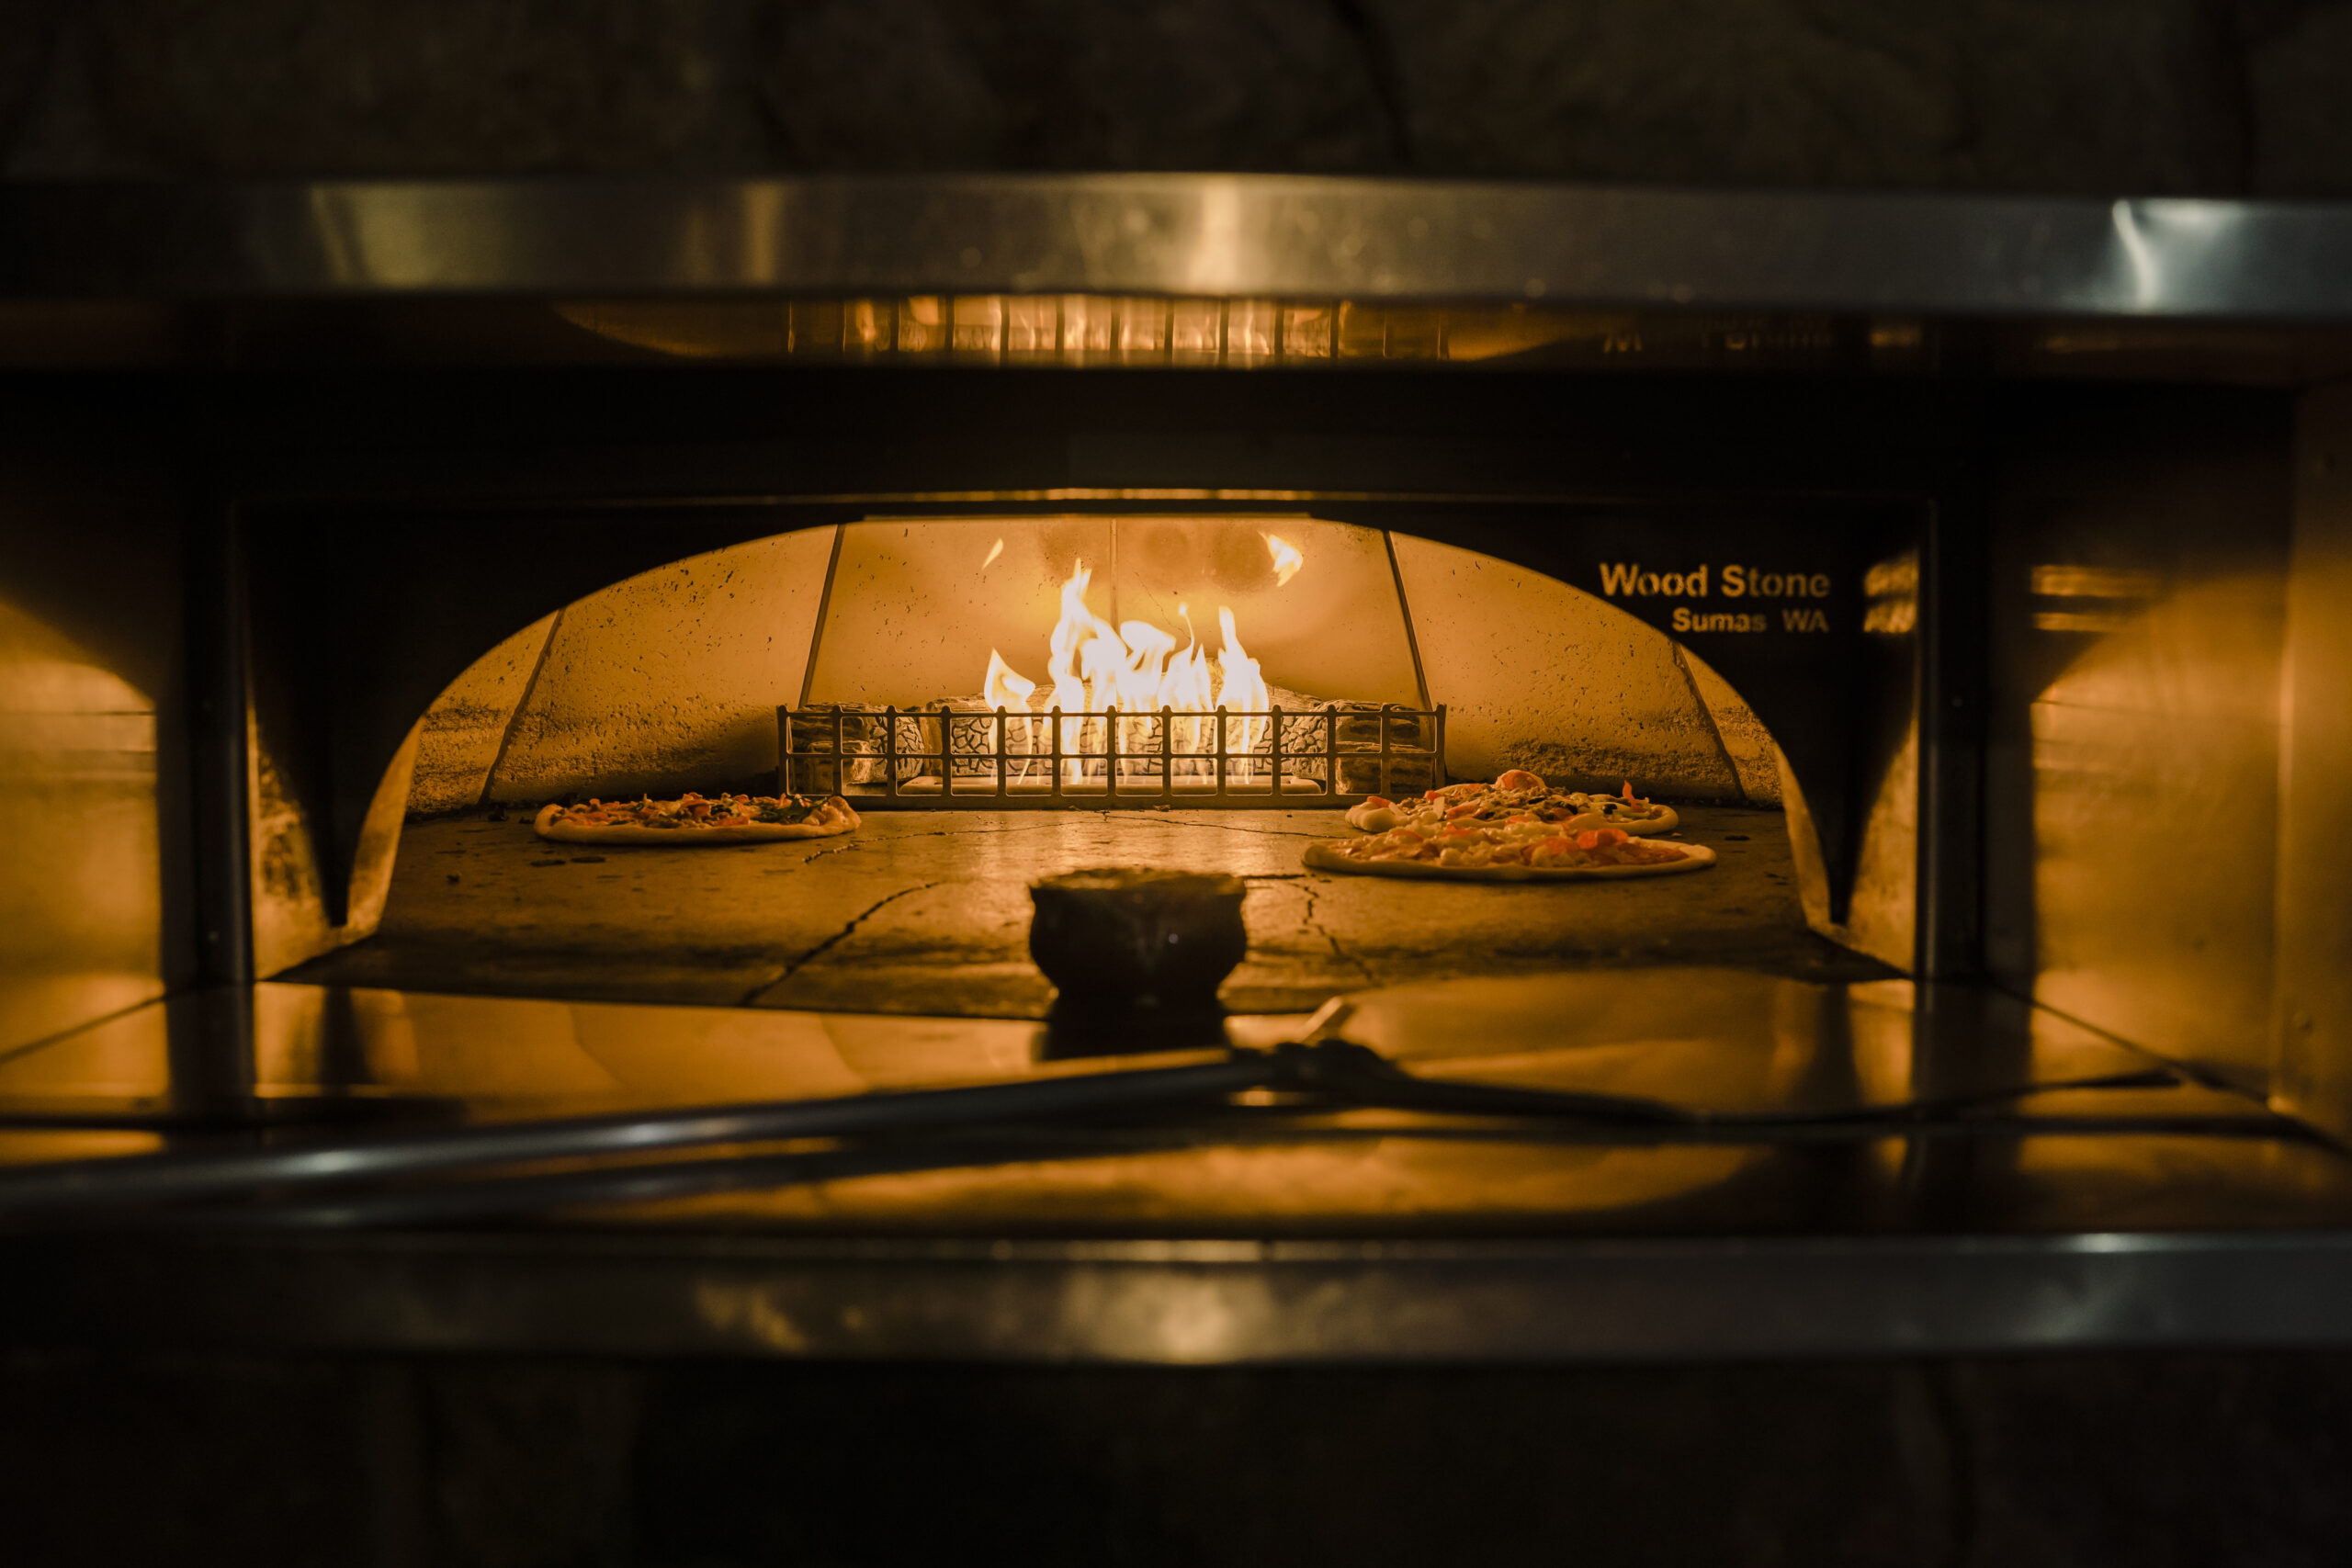 Pizza in the pizza oven at Giannos in High Point, NC